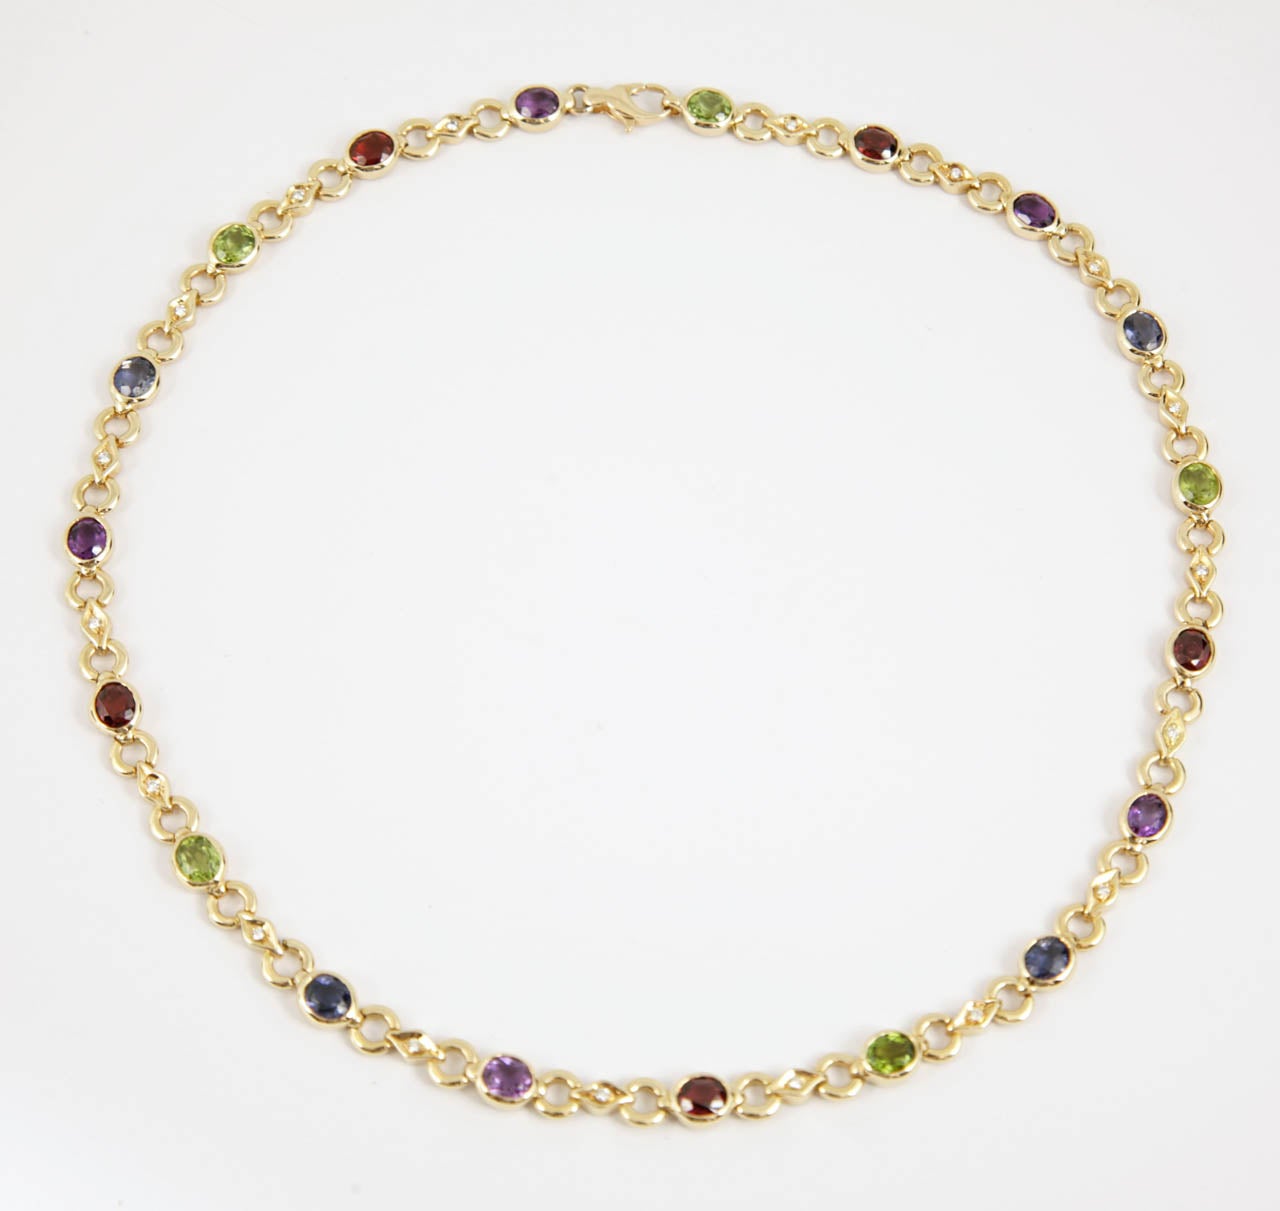 18ct gold, sapphire and coloured stone necklace

Italian

c.1980